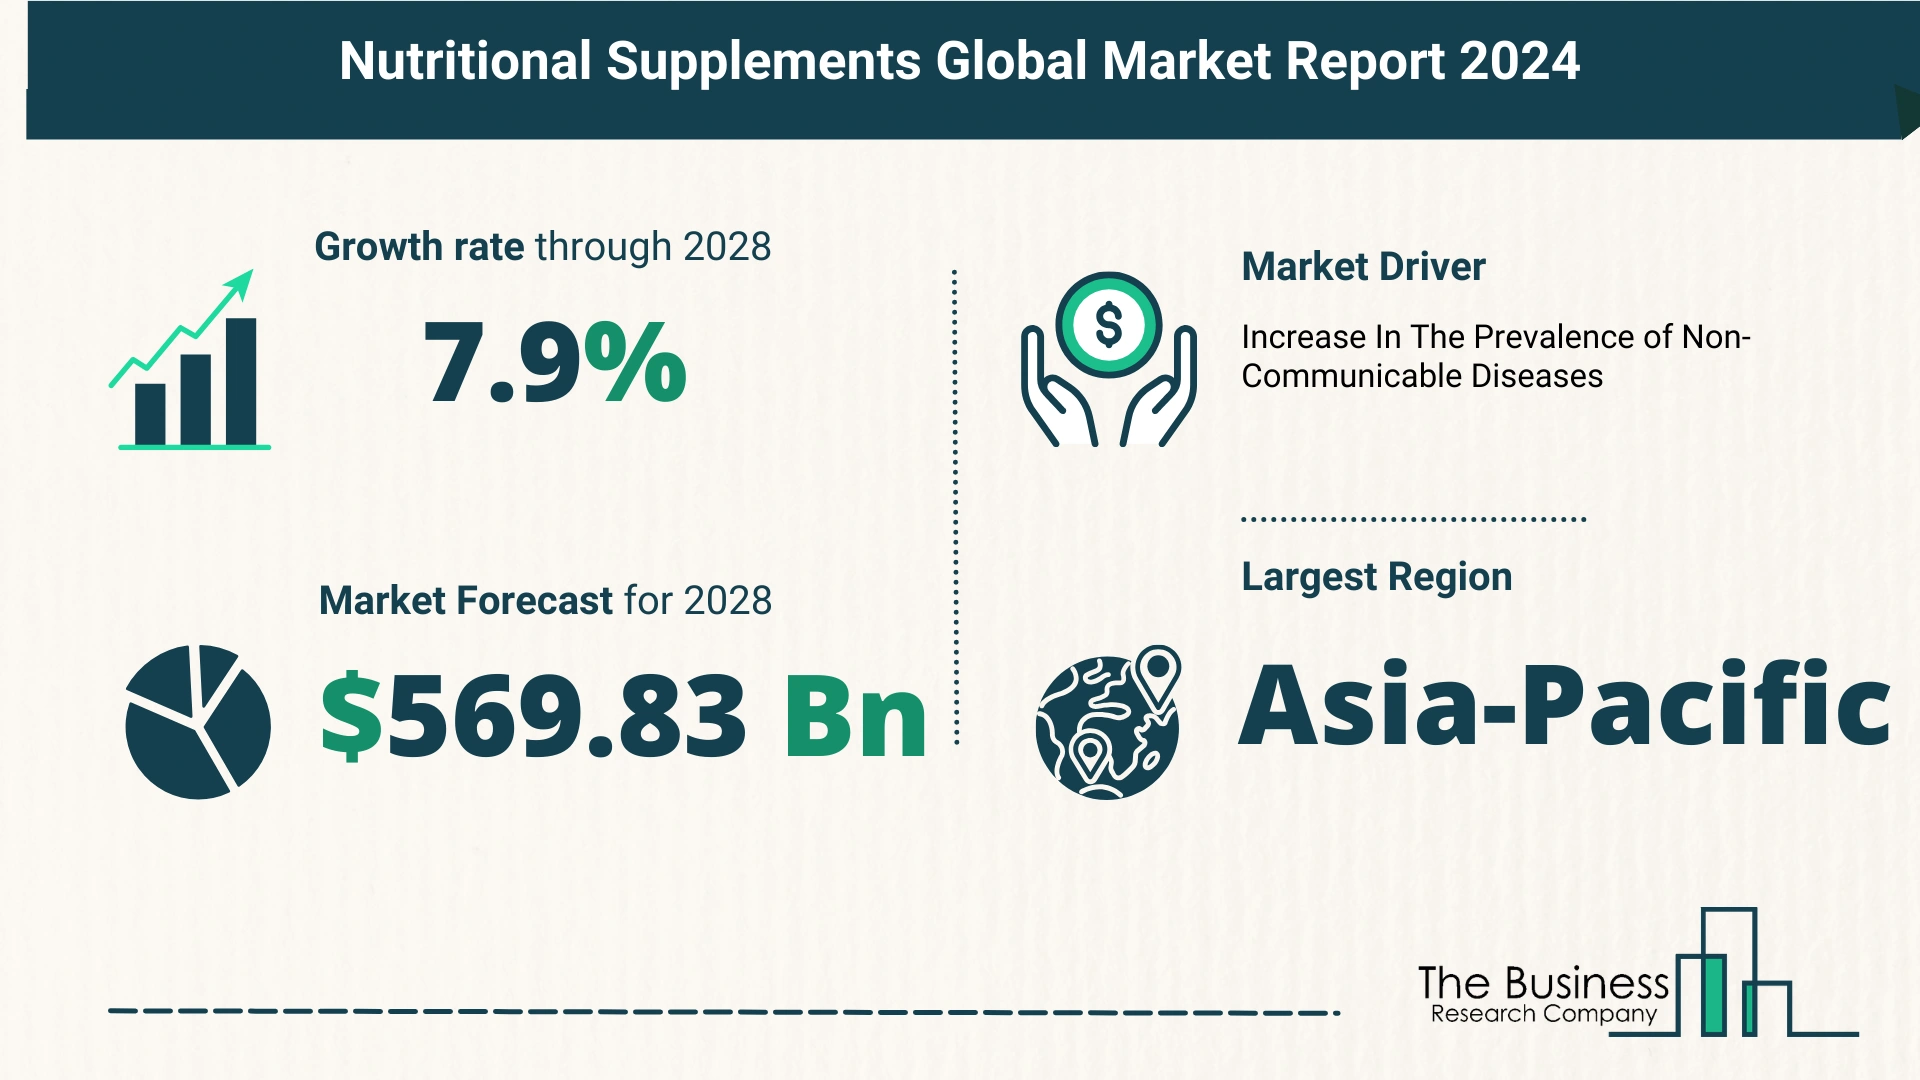 What Is The Forecast Growth Rate For The Nutritional Supplements Market?